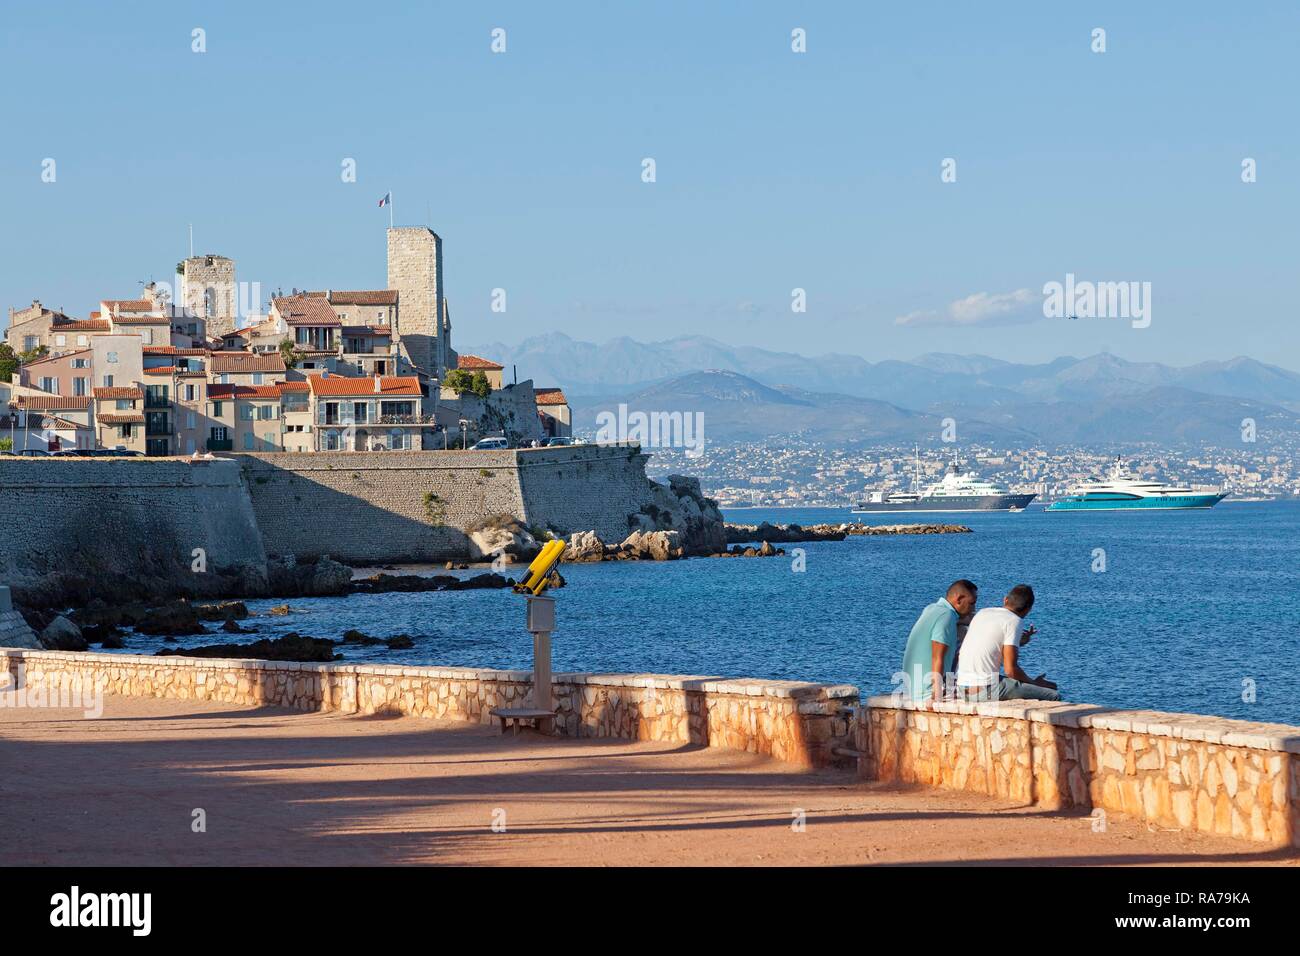 Old town, Antibes, Cote d'Azur, France Stock Photo